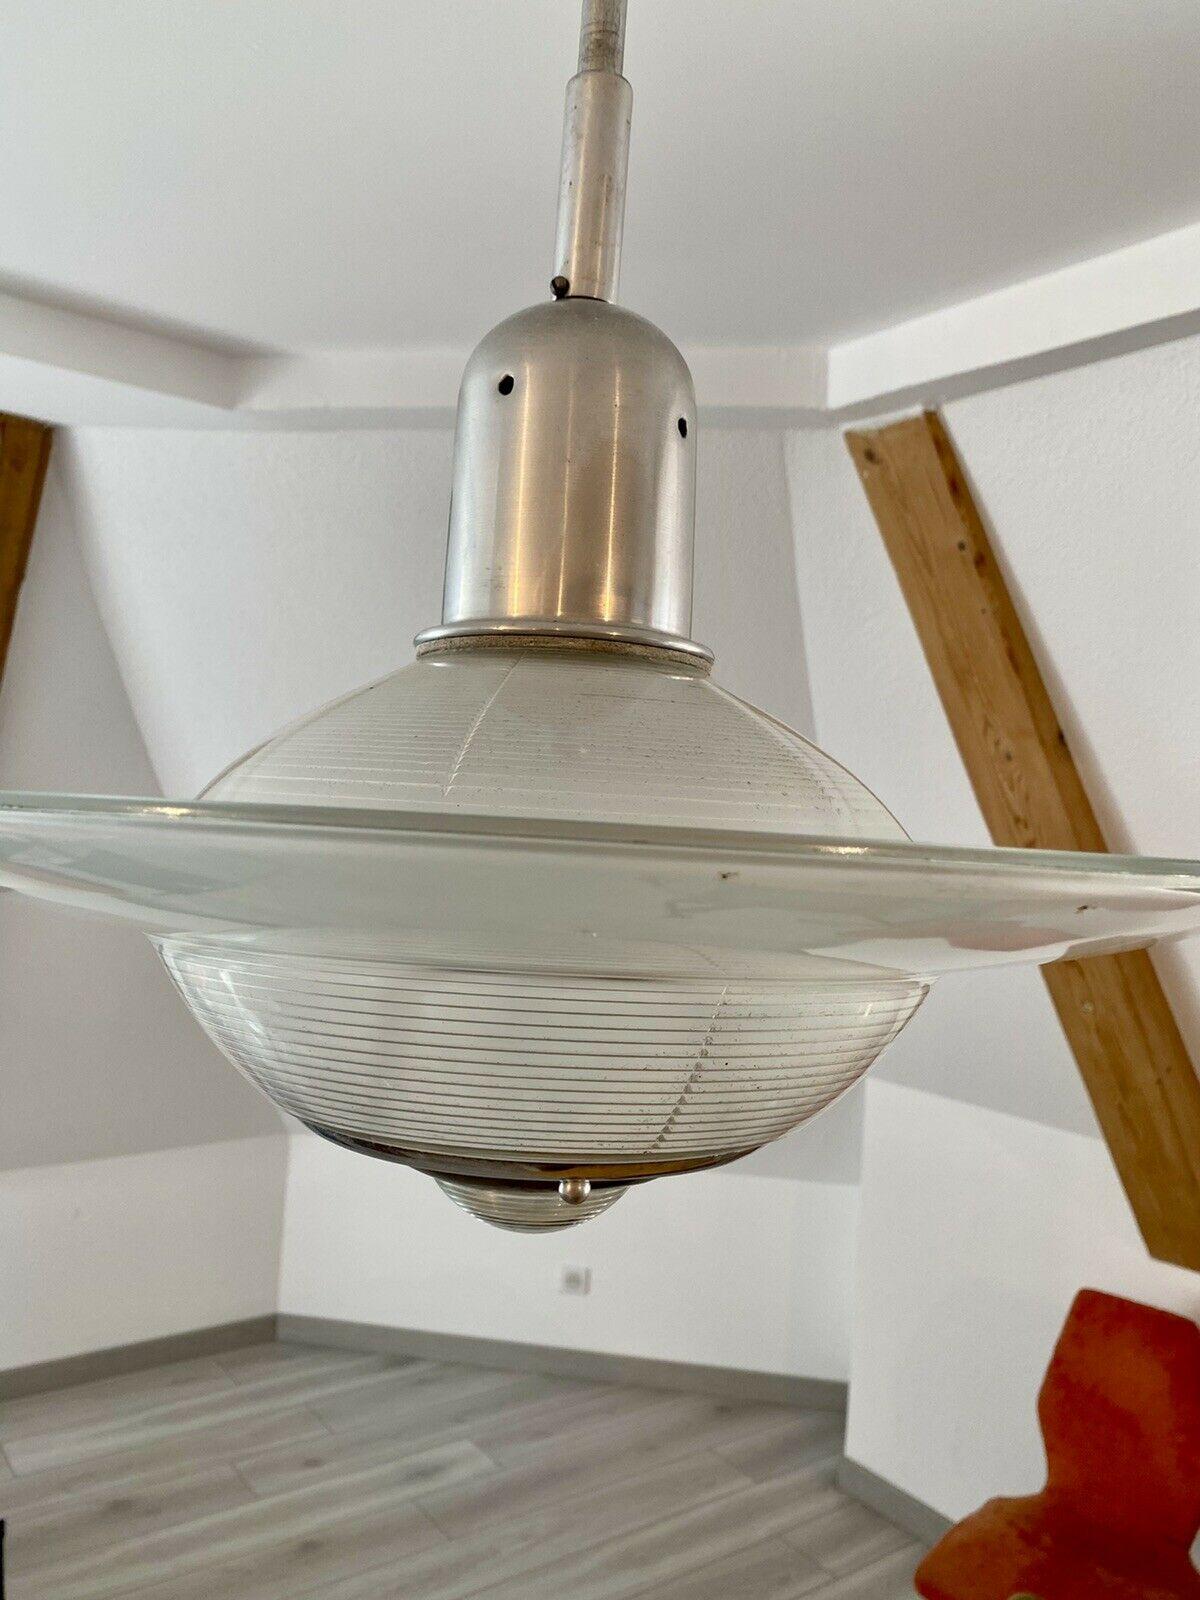 Mid-20th Century Vintage French Industrial Ceiling Light from Holophane, circa 1940/1950 For Sale